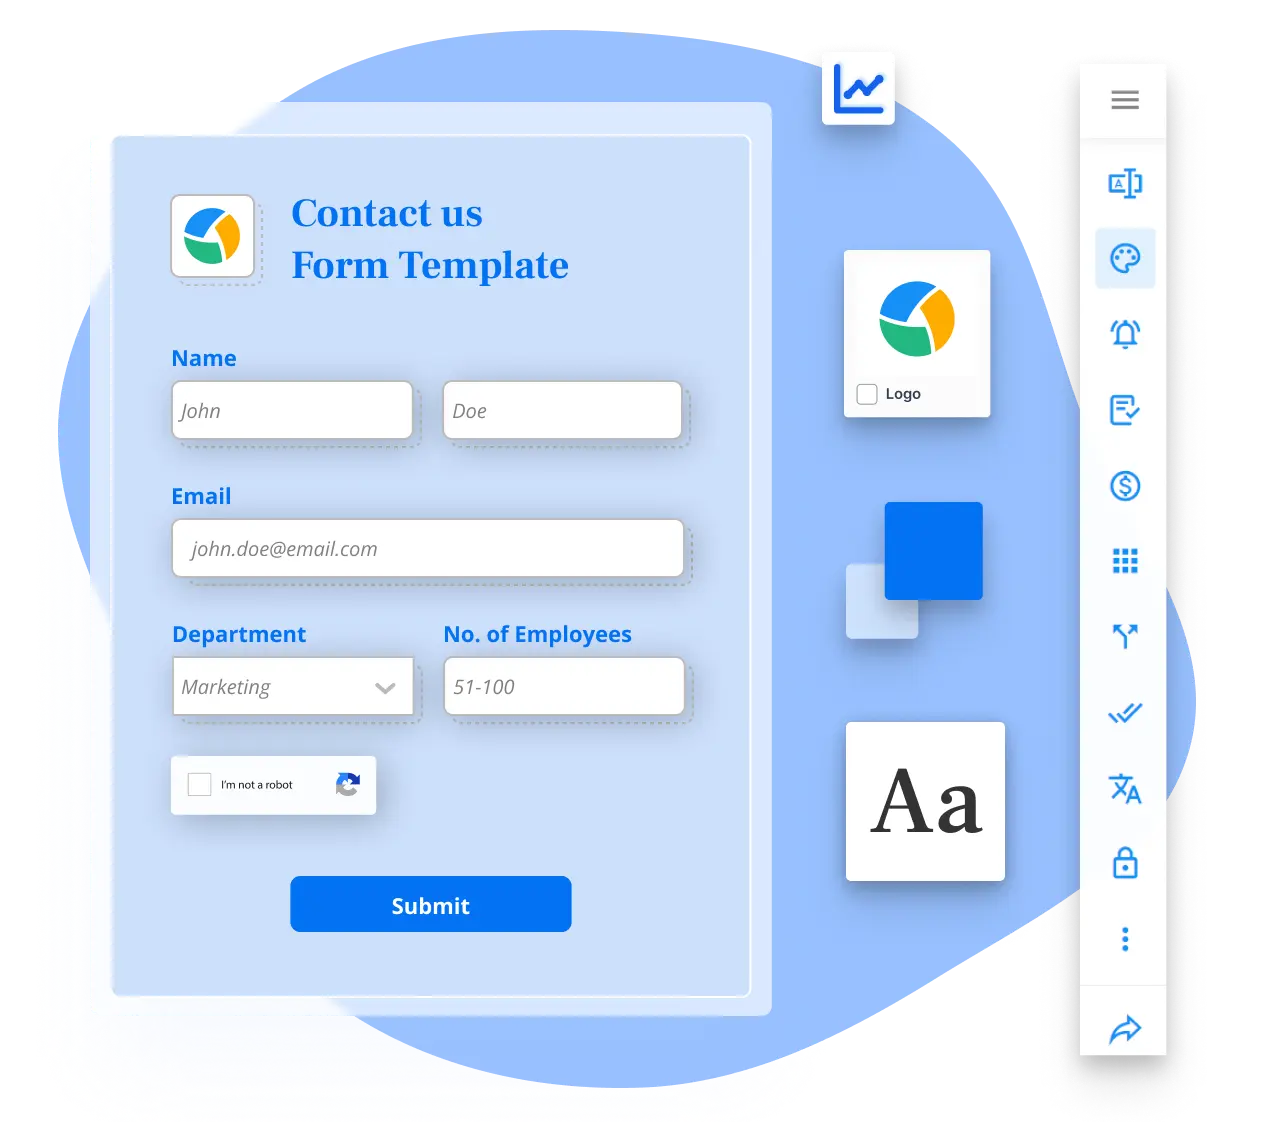 Image showing a contact us form template inside 123FormBuilder editor